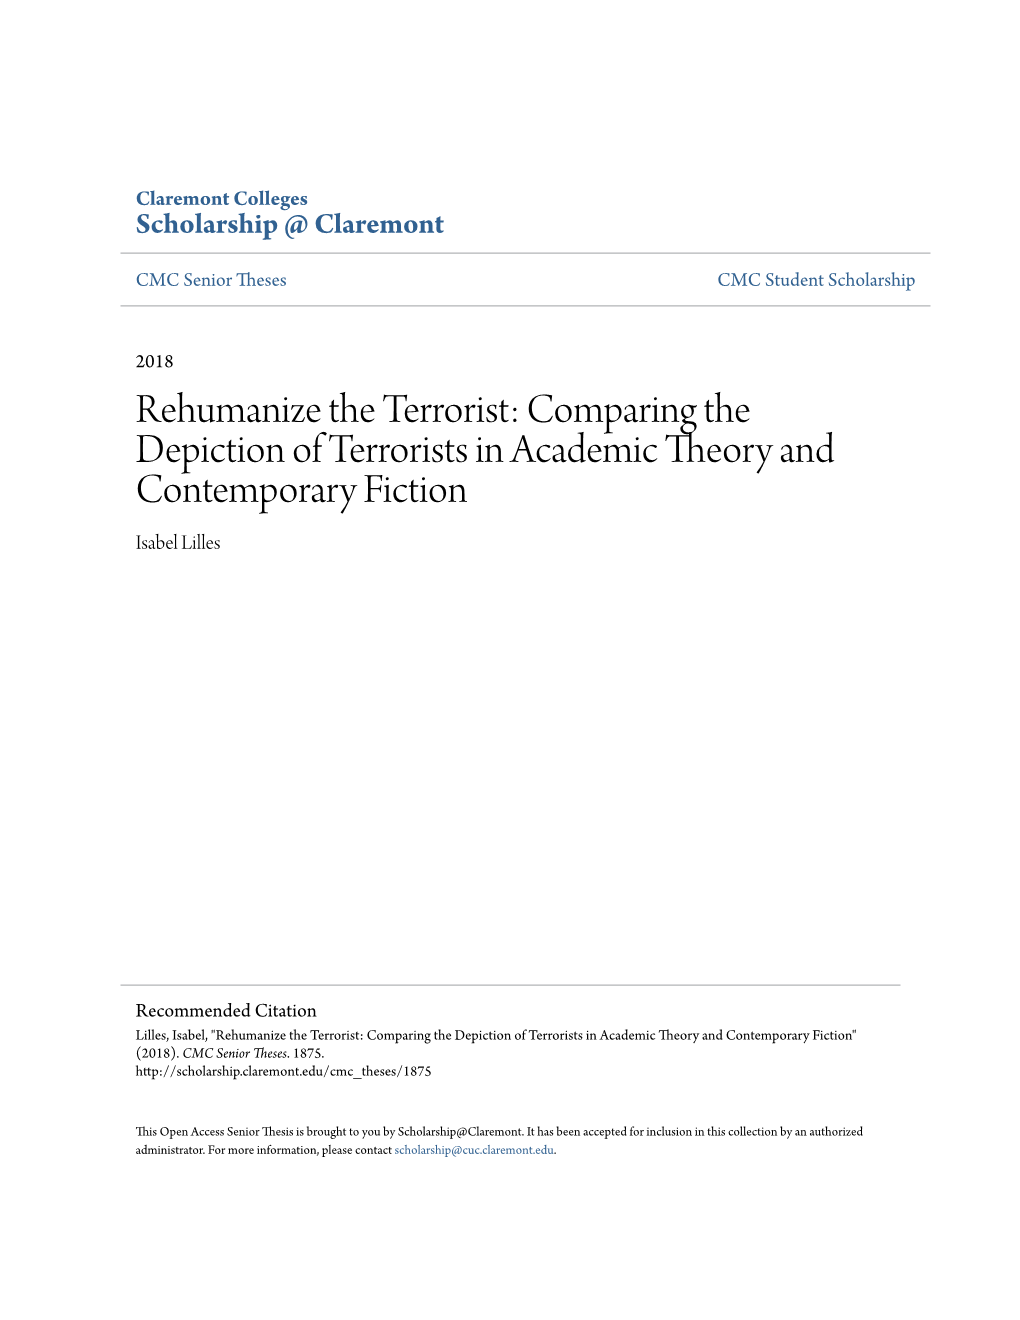 Rehumanize the Terrorist: Comparing the Depiction of Terrorists in Academic Theory and Contemporary Fiction Isabel Lilles